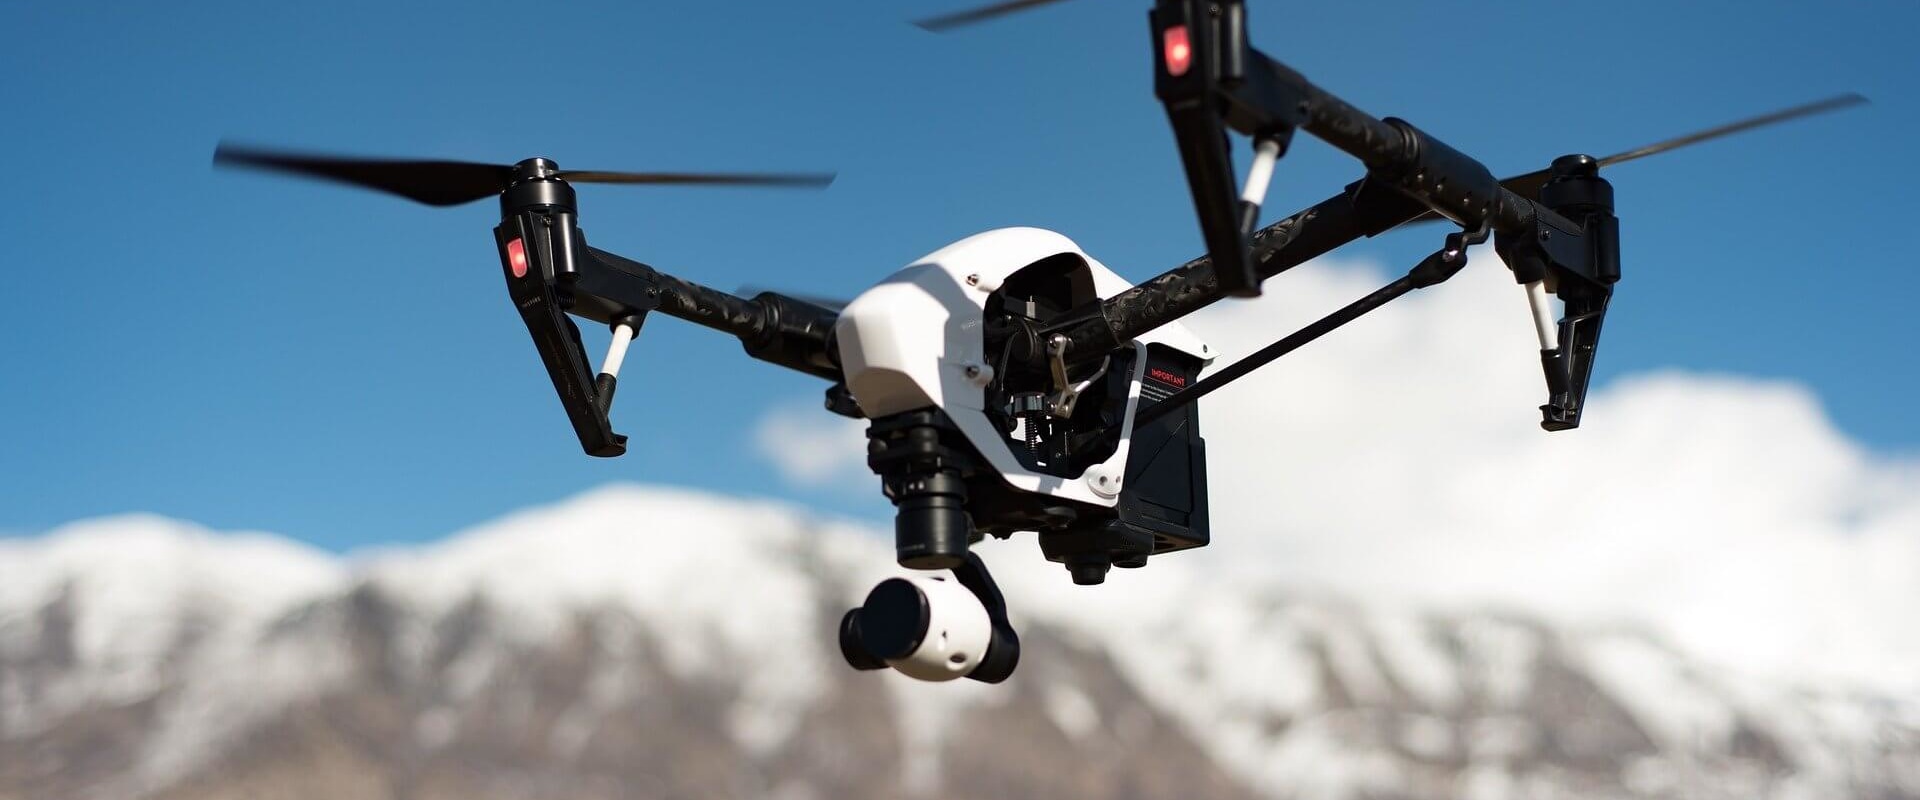 Privacy Considerations When Using Drones